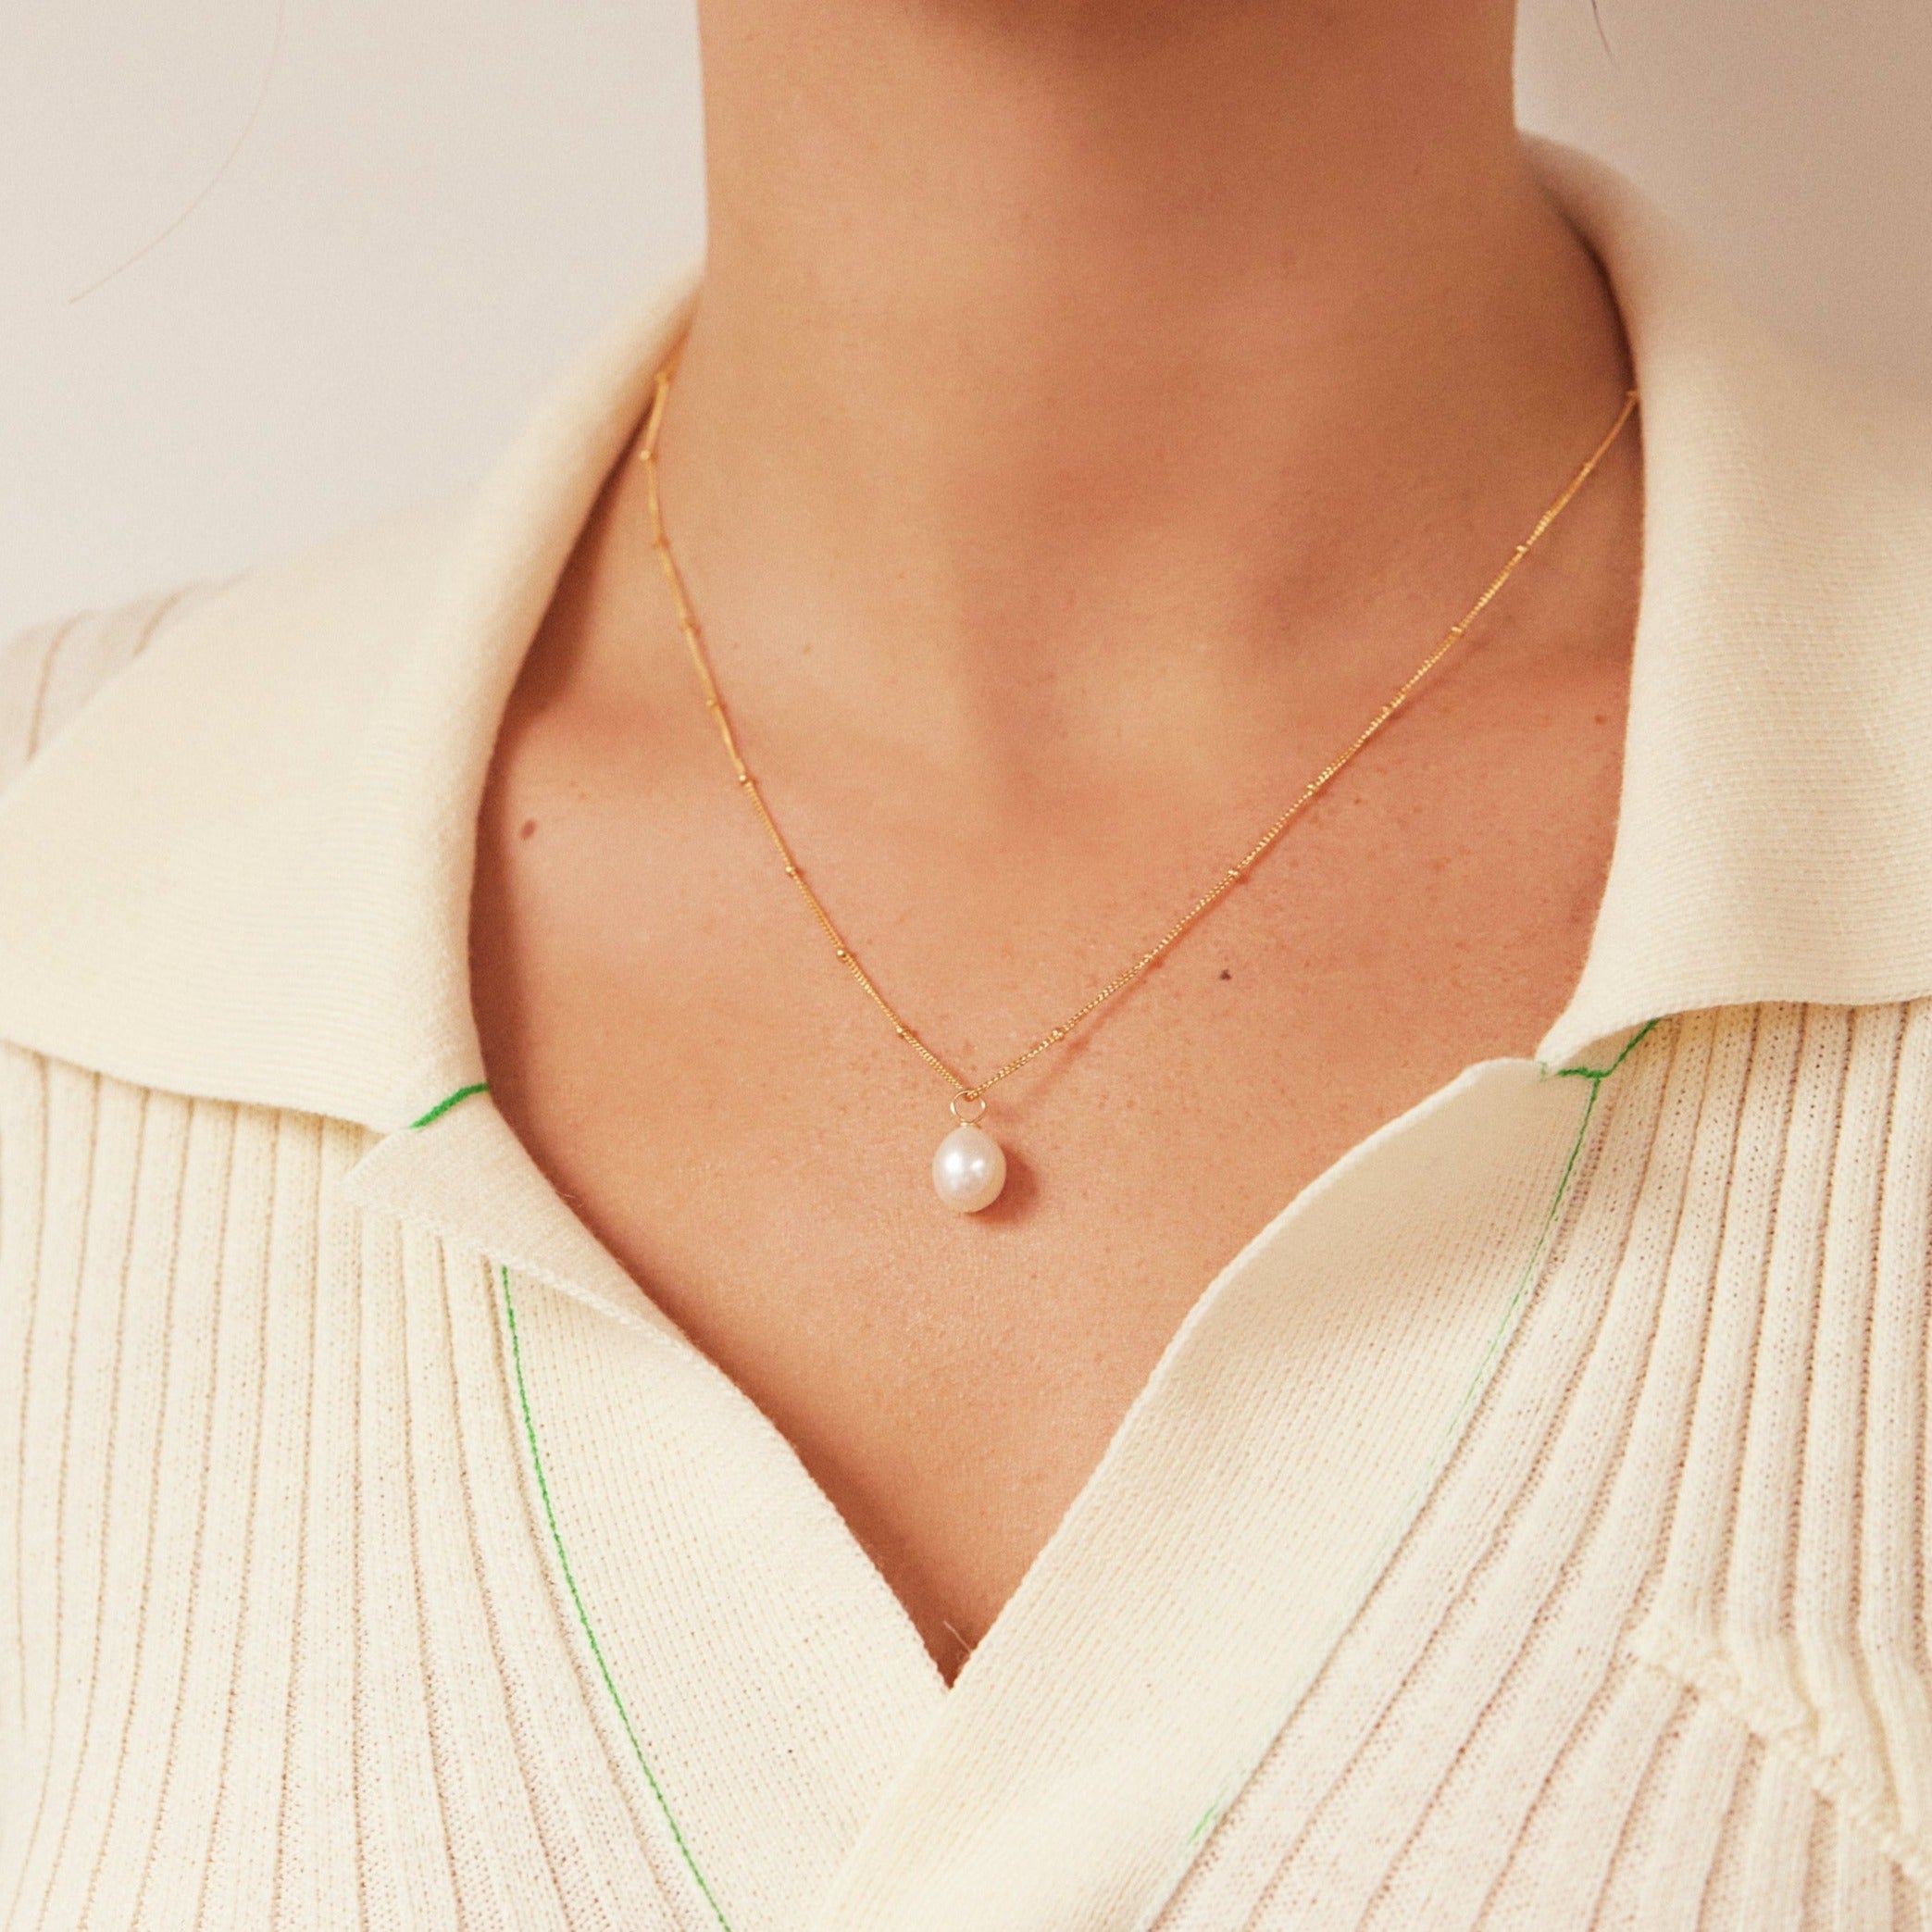 Gold large pearl satellite necklace on a woman with a cream collared shirt